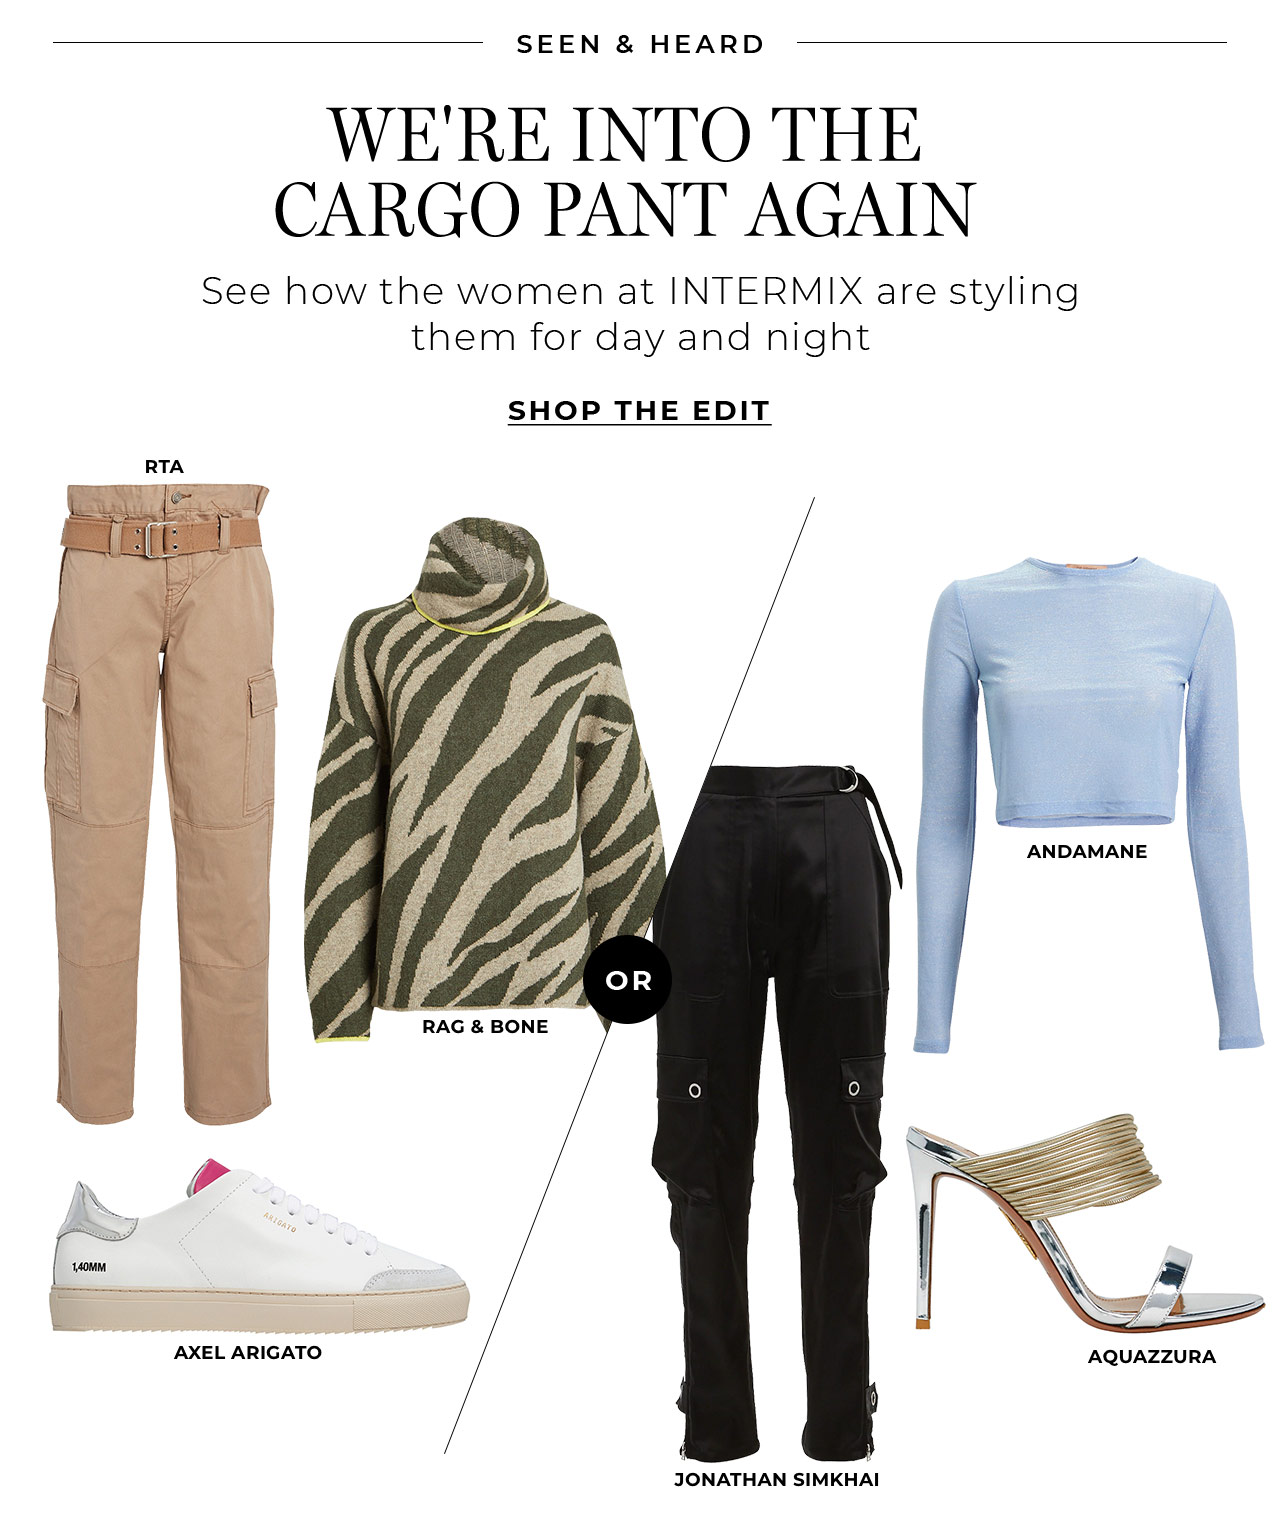 We're into the cargo pant again